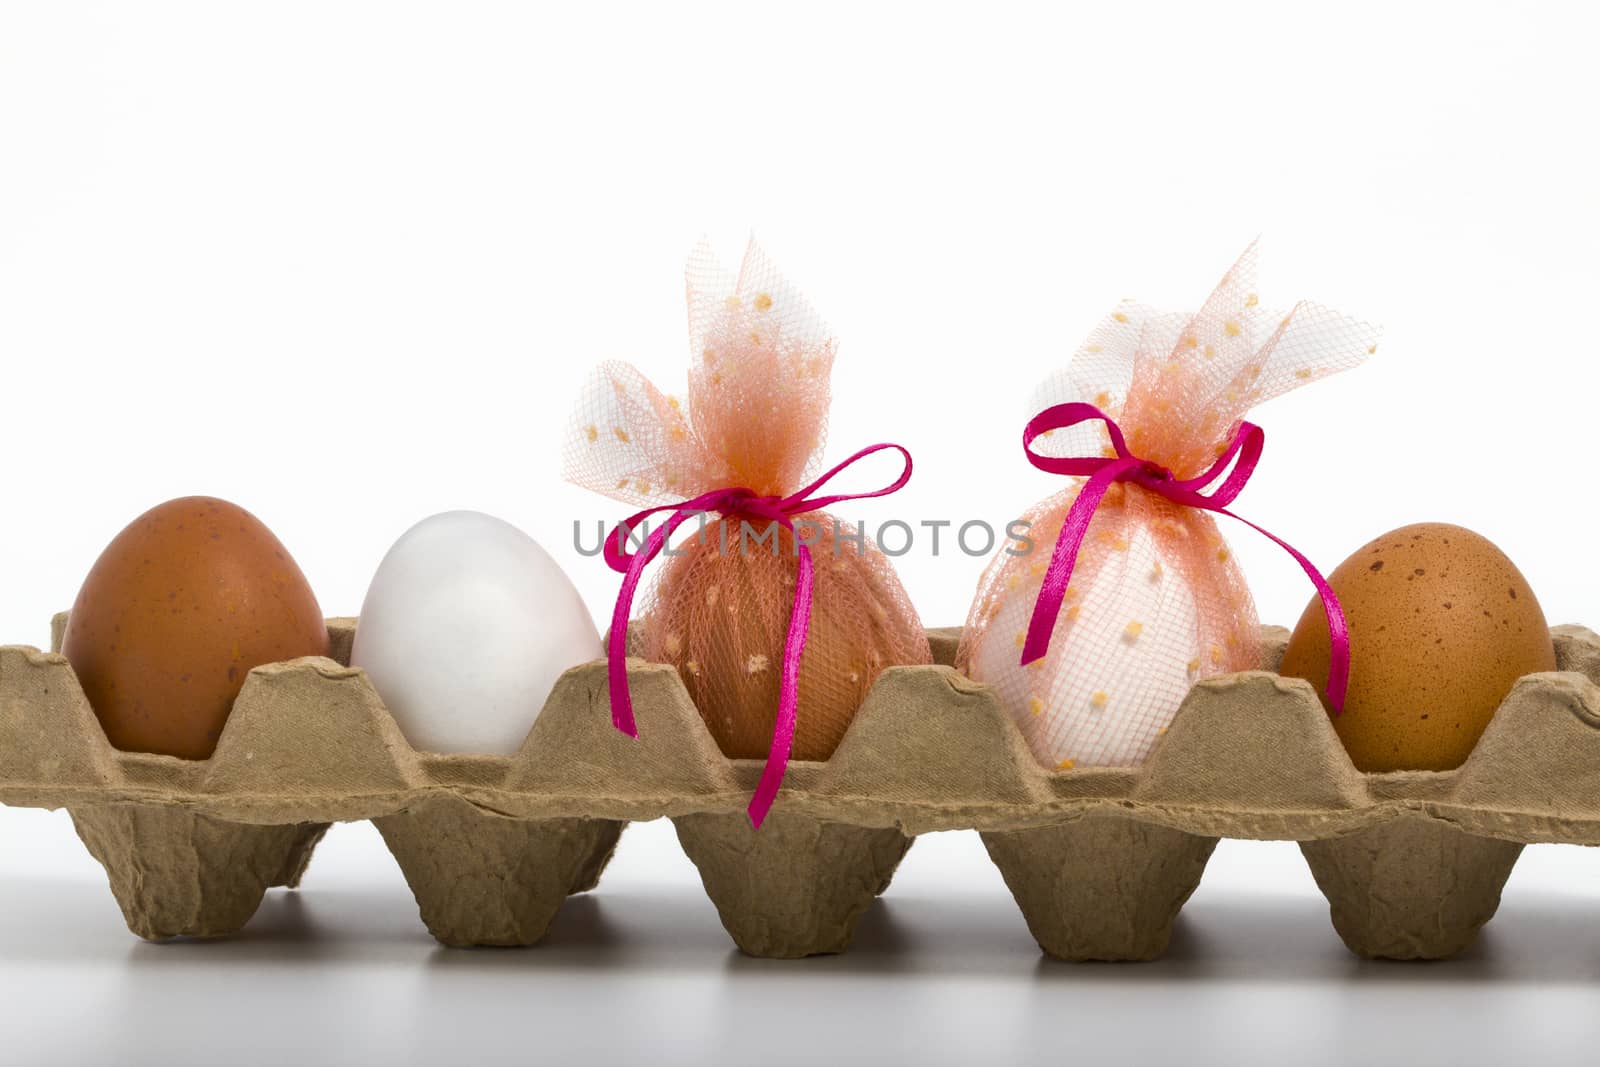 carton box with ornate easter eggs2 by Olvita